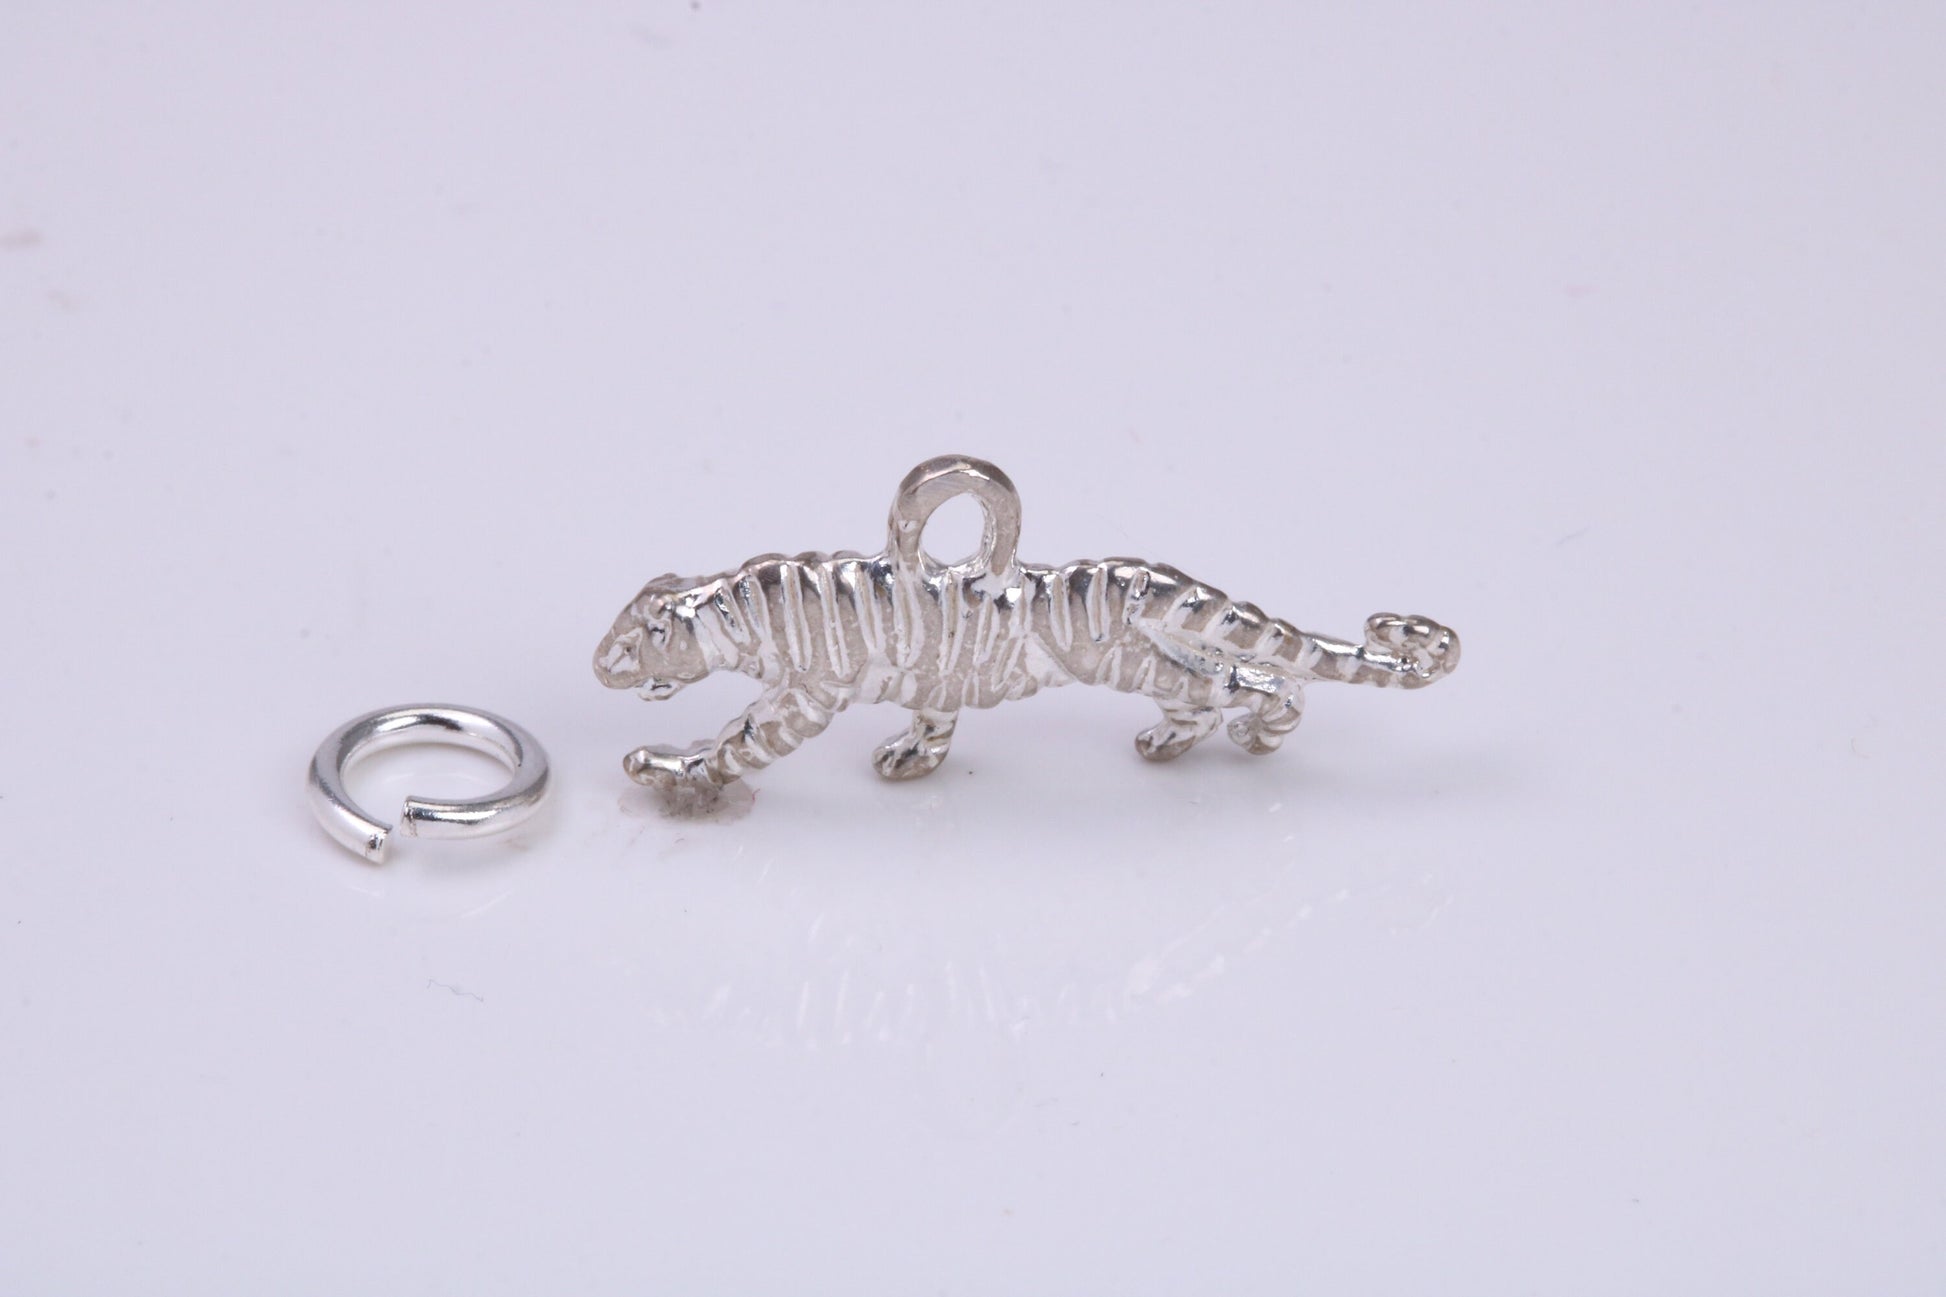 Tiger Charm, Traditional Charm, Made from Solid 925 Grade Sterling Silver, Complete with Attachment Link